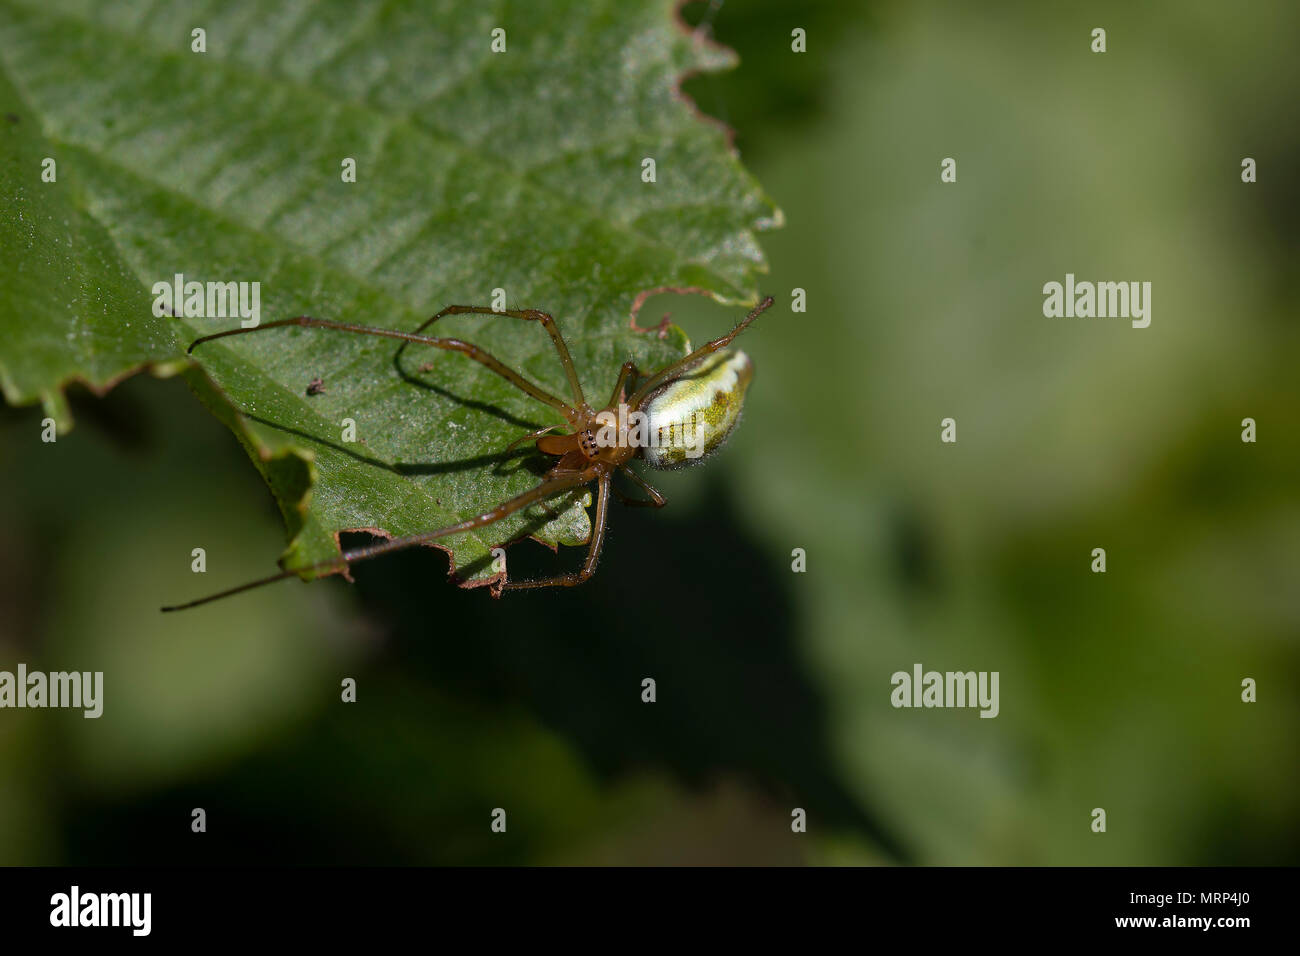 common stretch spider, long-jawed ore-weaver, Tetragnatha, resting on leaf in sunshine. Stock Photo